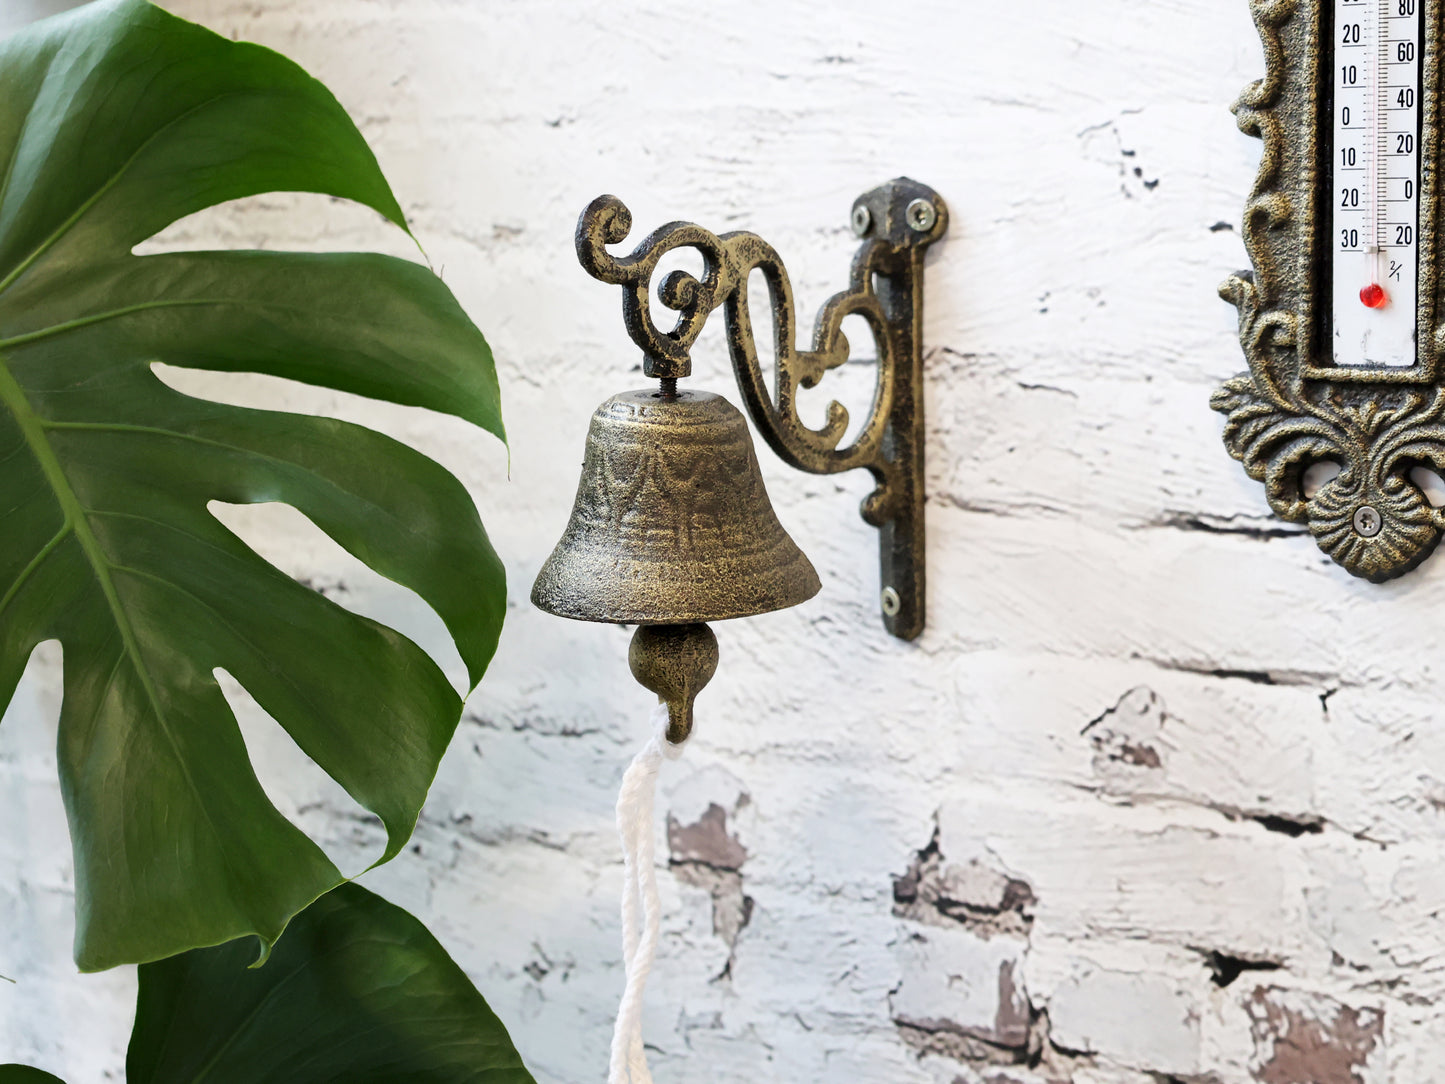 Cast Iron Call Bell for Wall (only 1 left!)